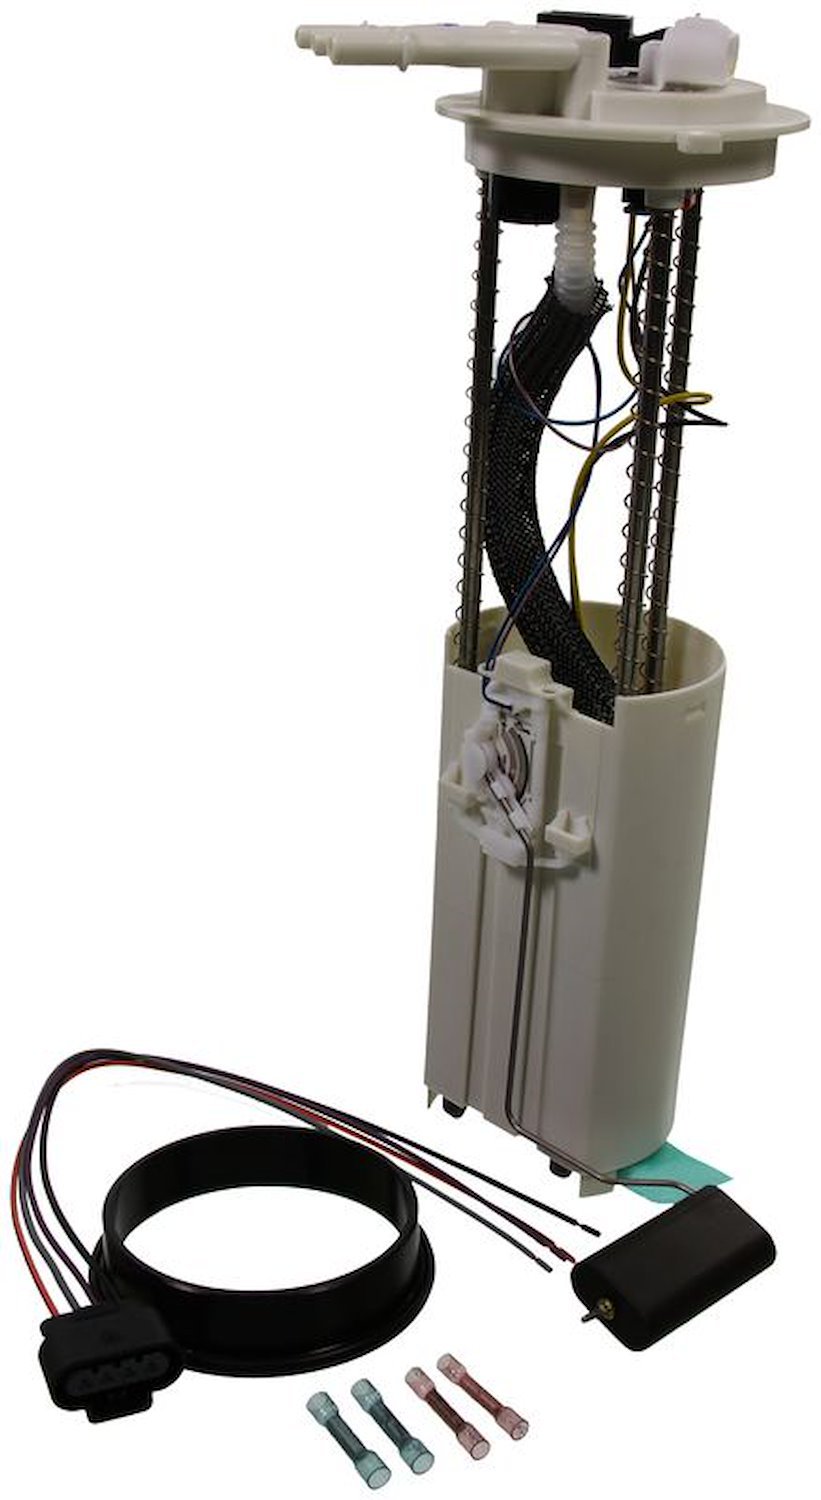 OE GM Replacement Electric Fuel Pump Module Assembly for 2002-2003 Chevy S10/GMC Sonoma